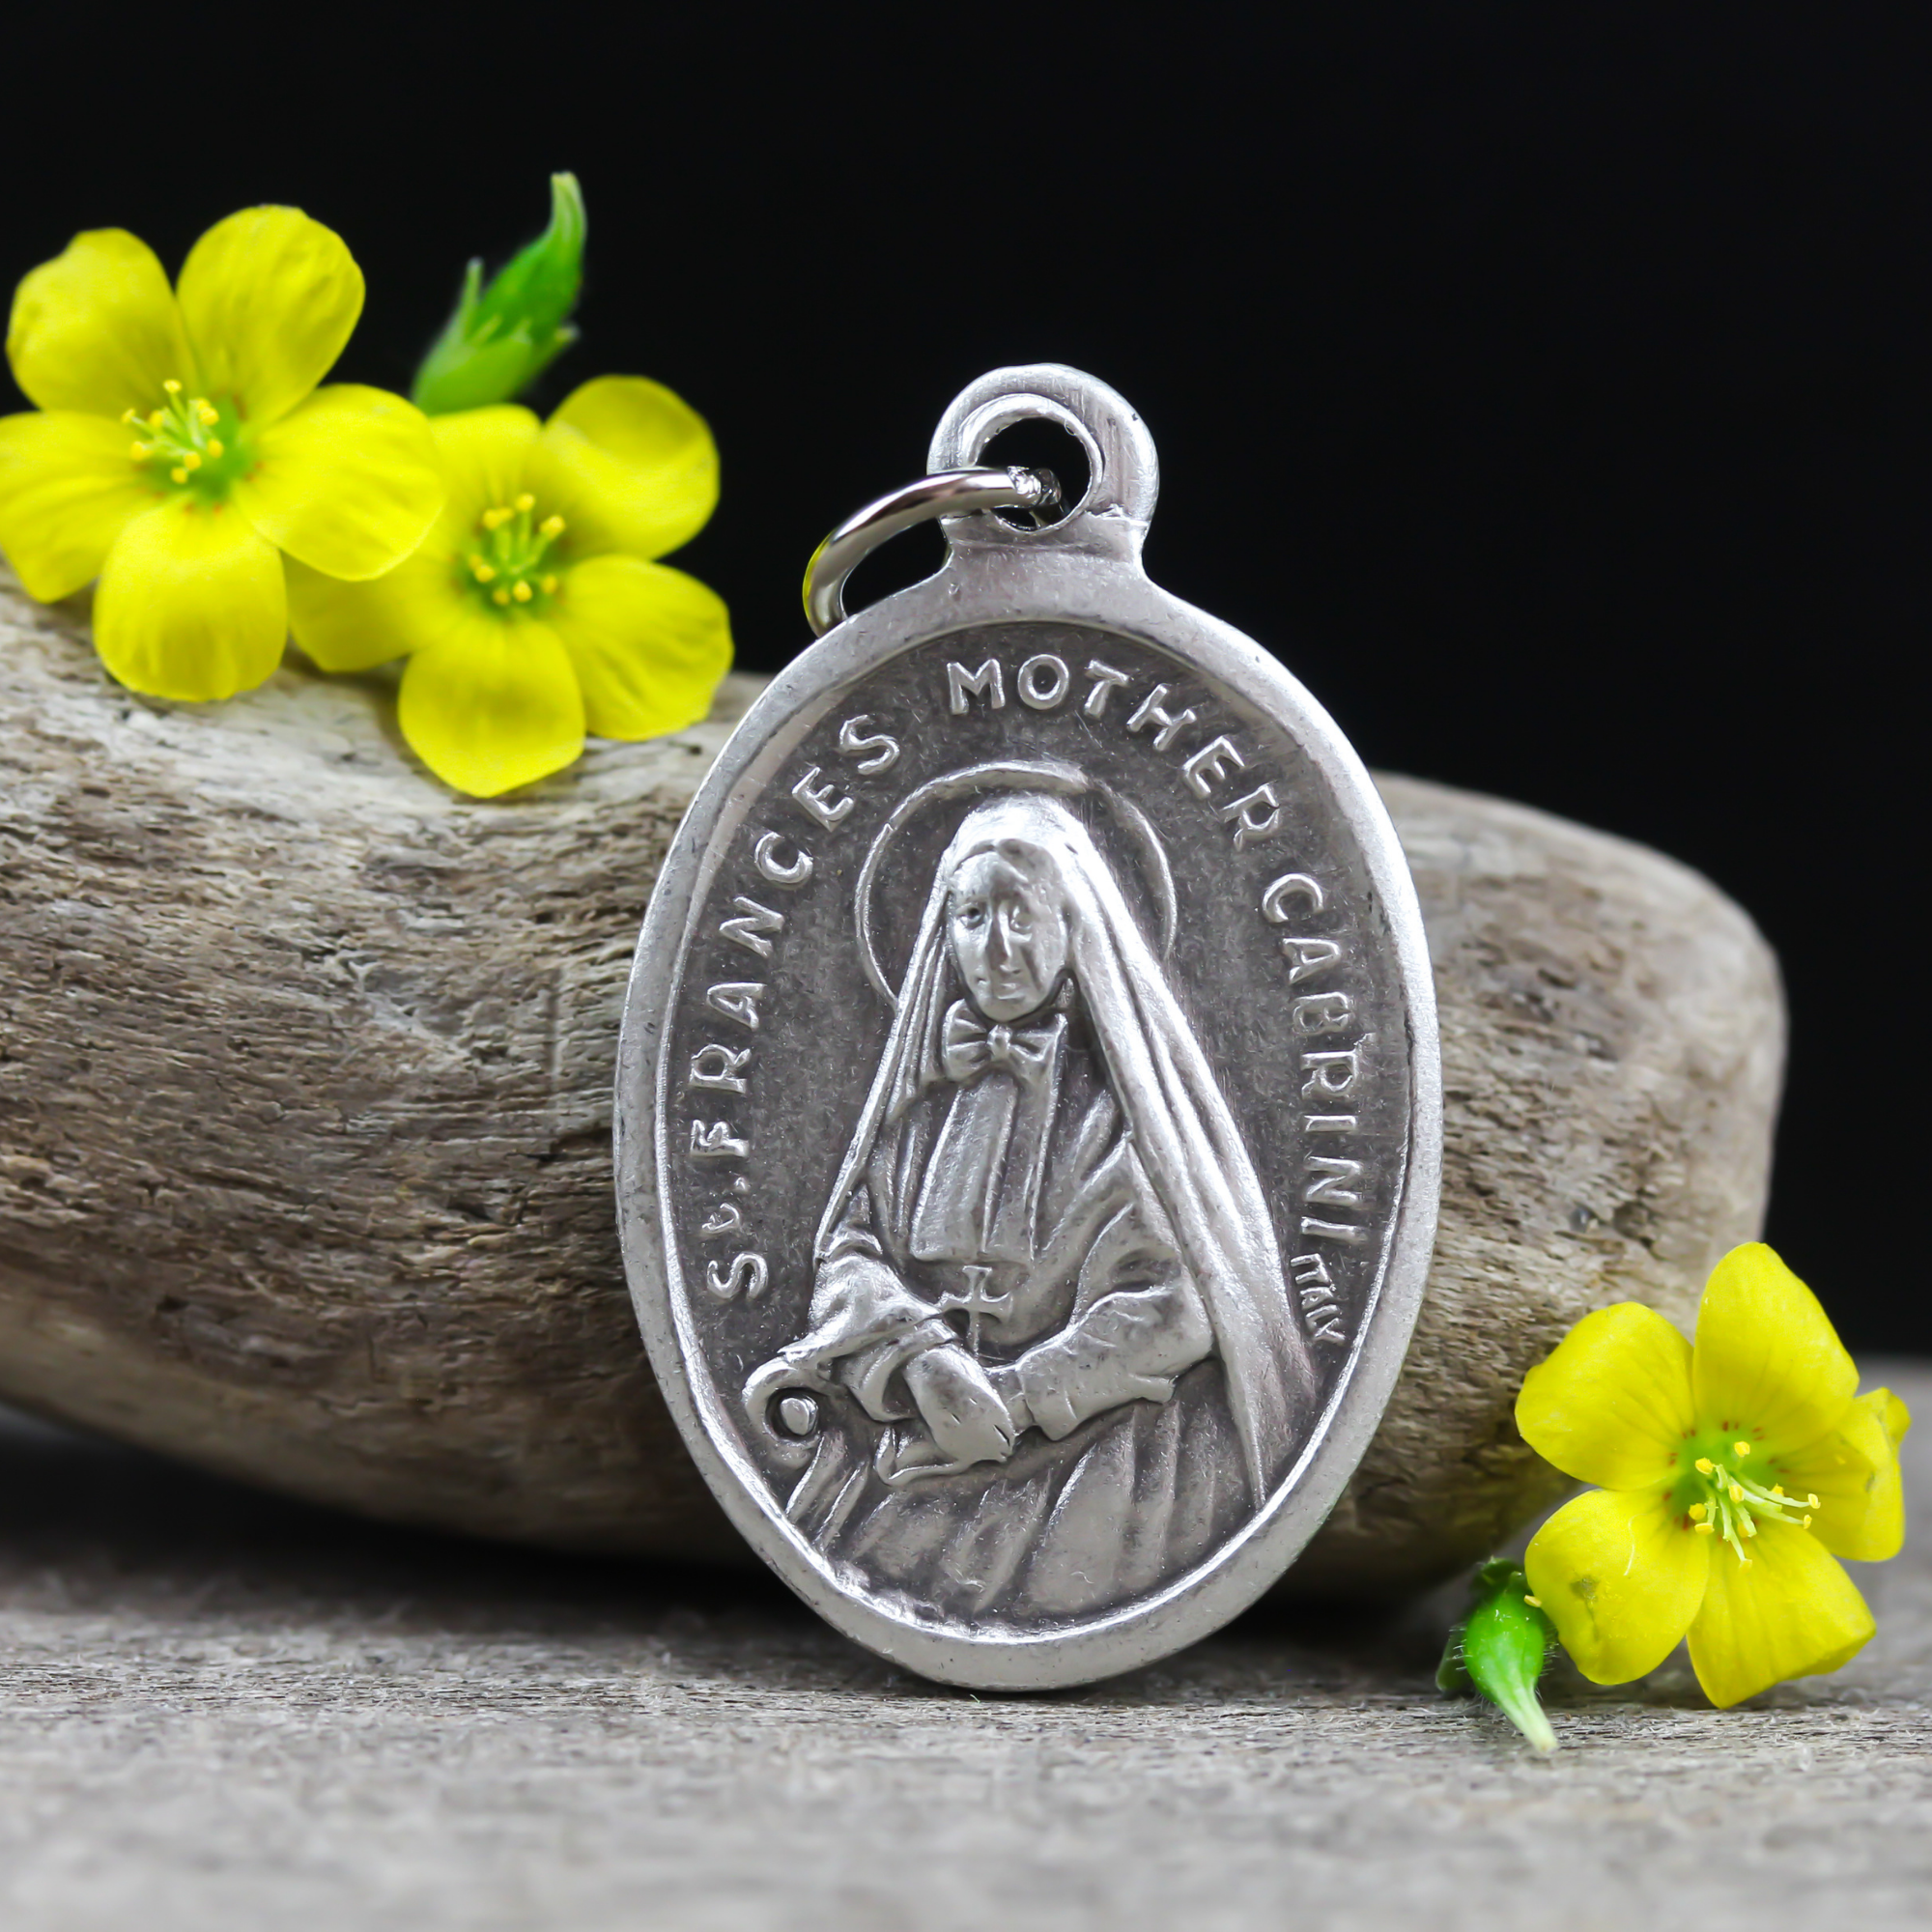 St. Francis Mother Cabrini Pray for us medal